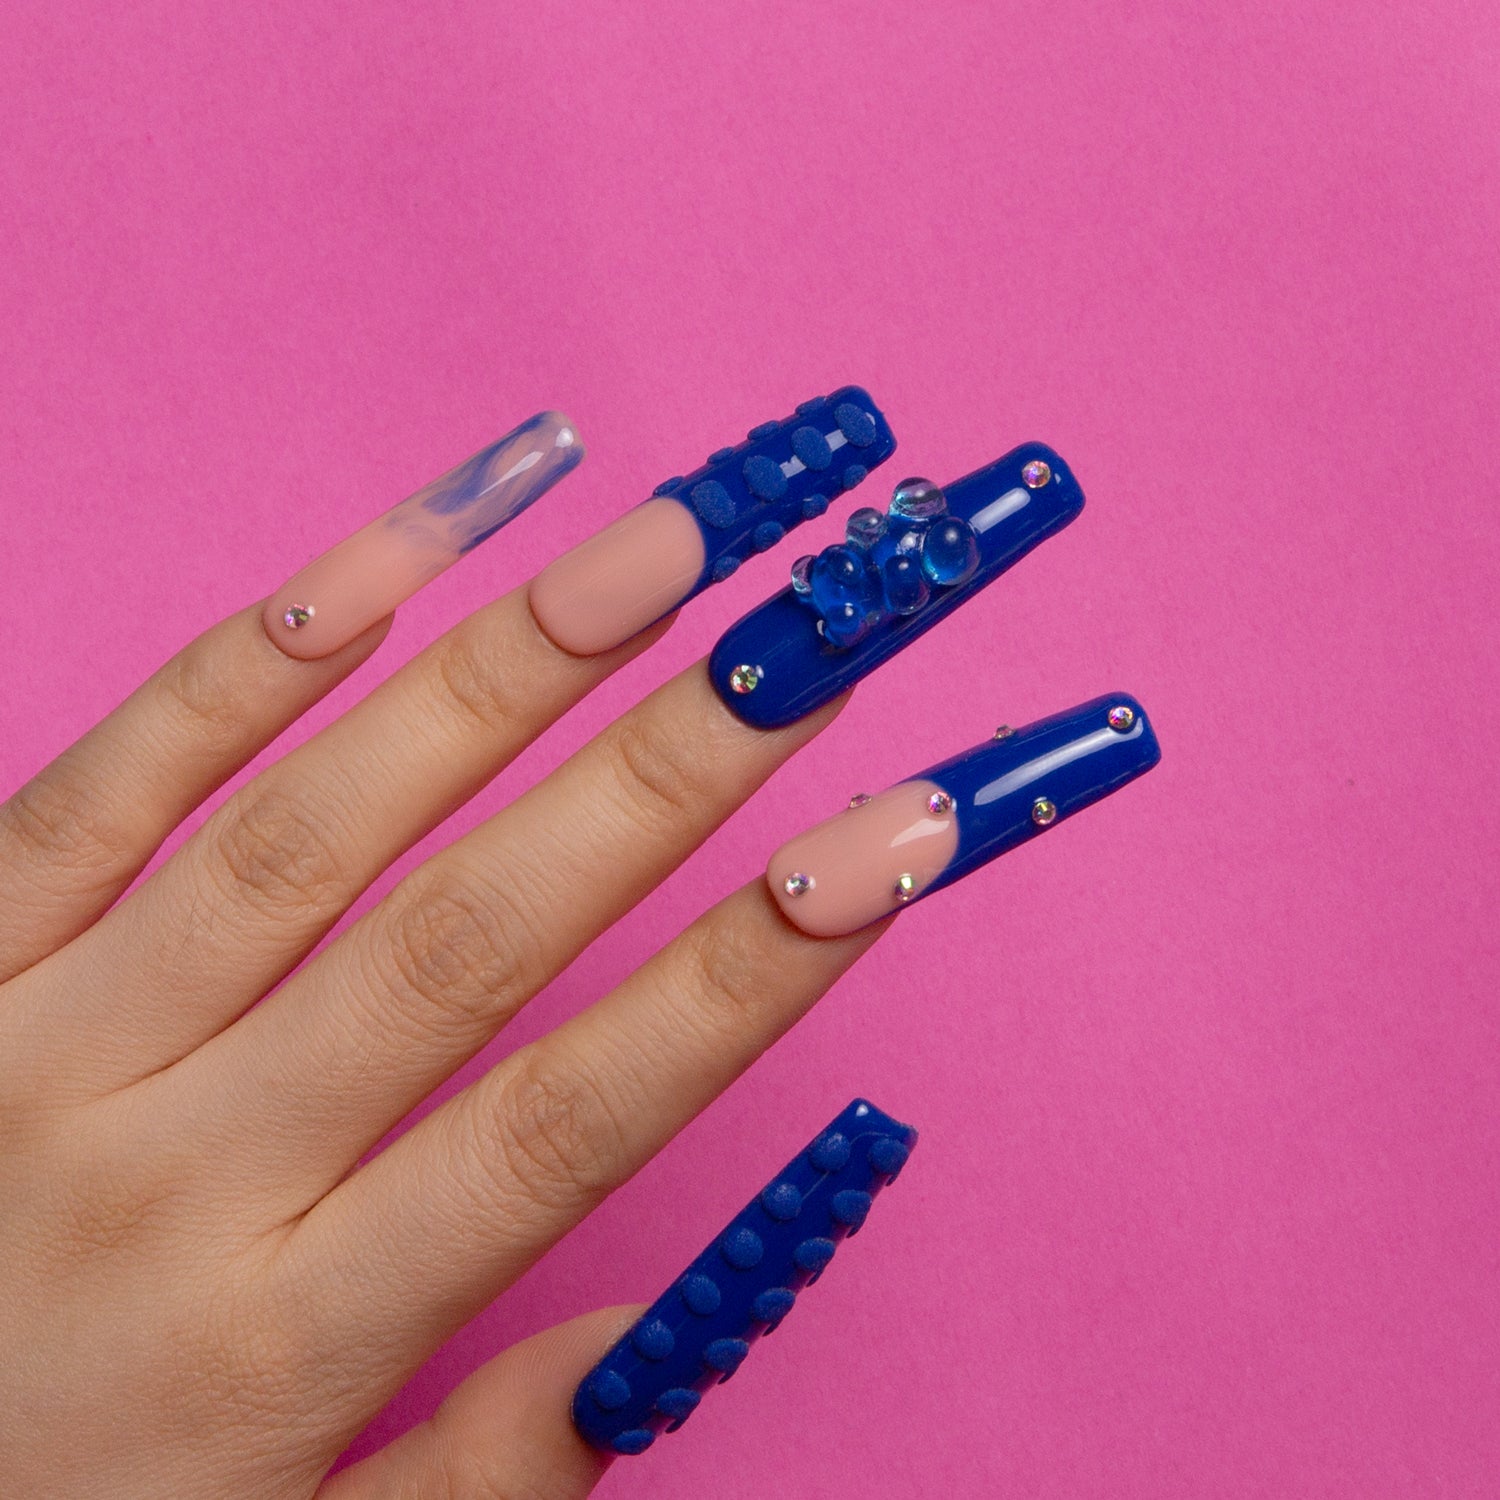 Blue and pink press-on acrylic nails with rhinestones, gummy bear decorations, and 3D dots on a hand against a pink background. Square nail shape from Lovful.com's Little Blue Bear collection.